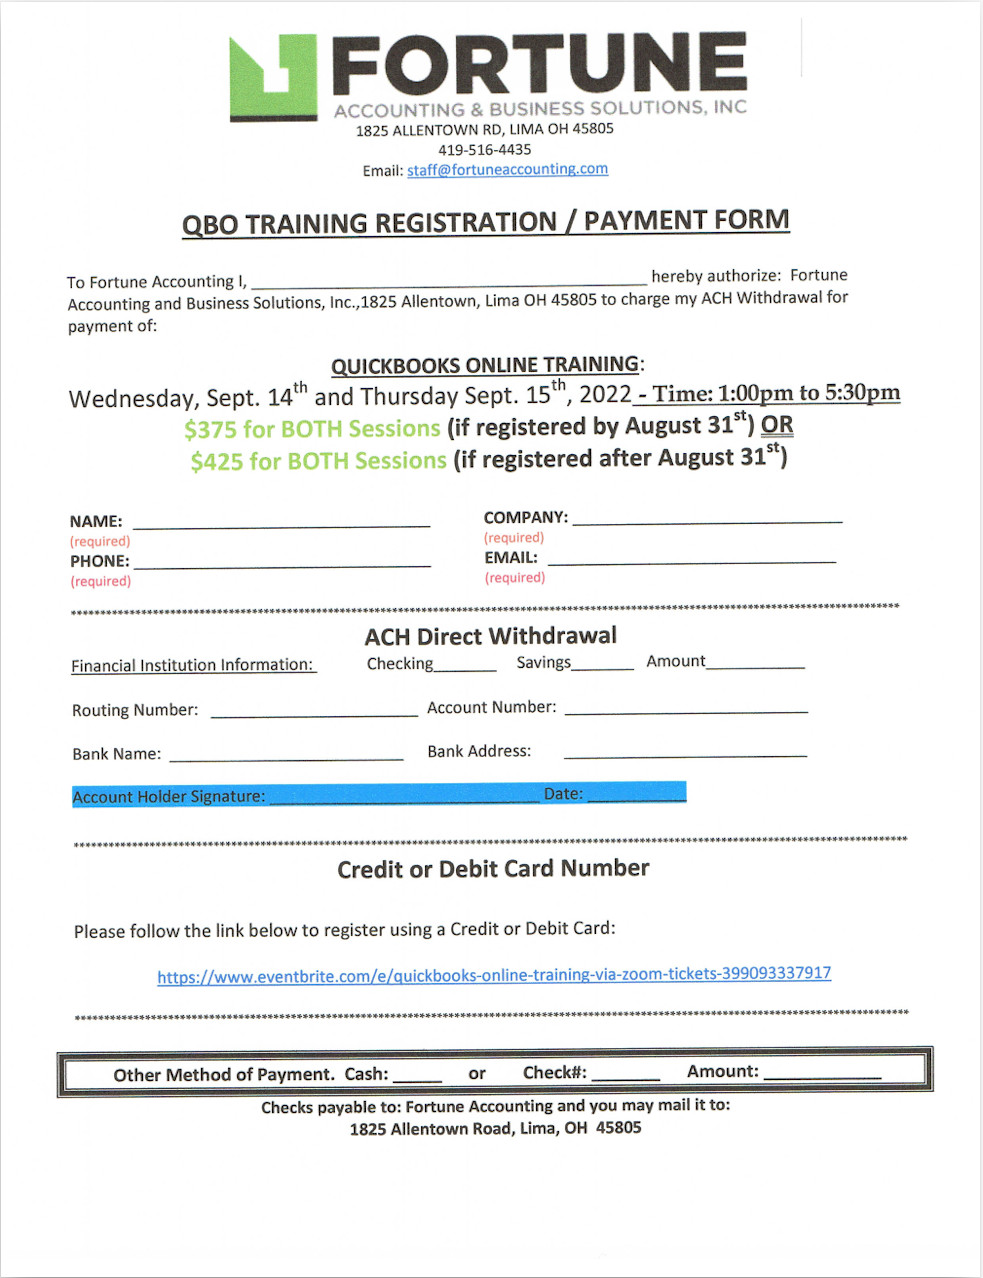 QBO Sept 2022 Registration and Payment Form image